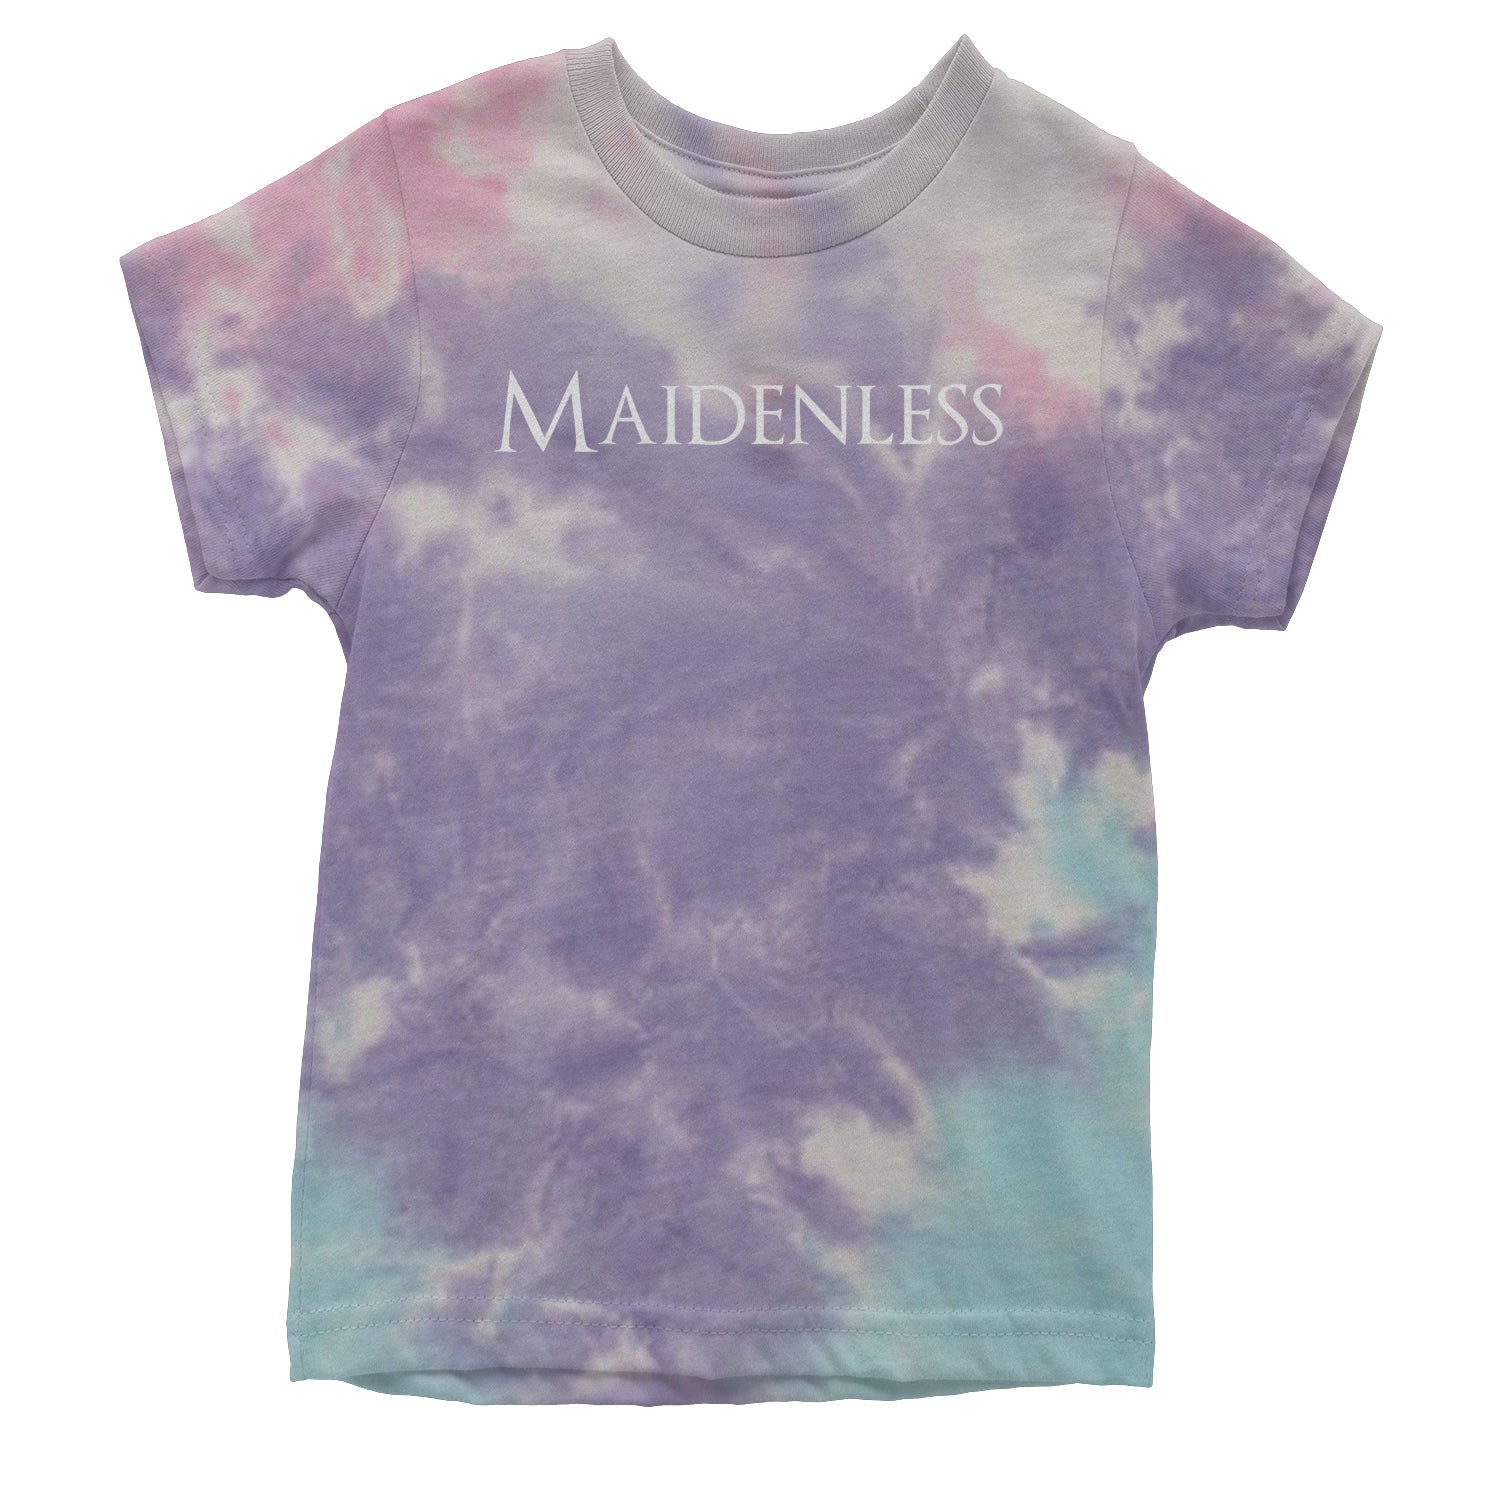 Maidenless Youth T-shirt elden, game, video by Expression Tees